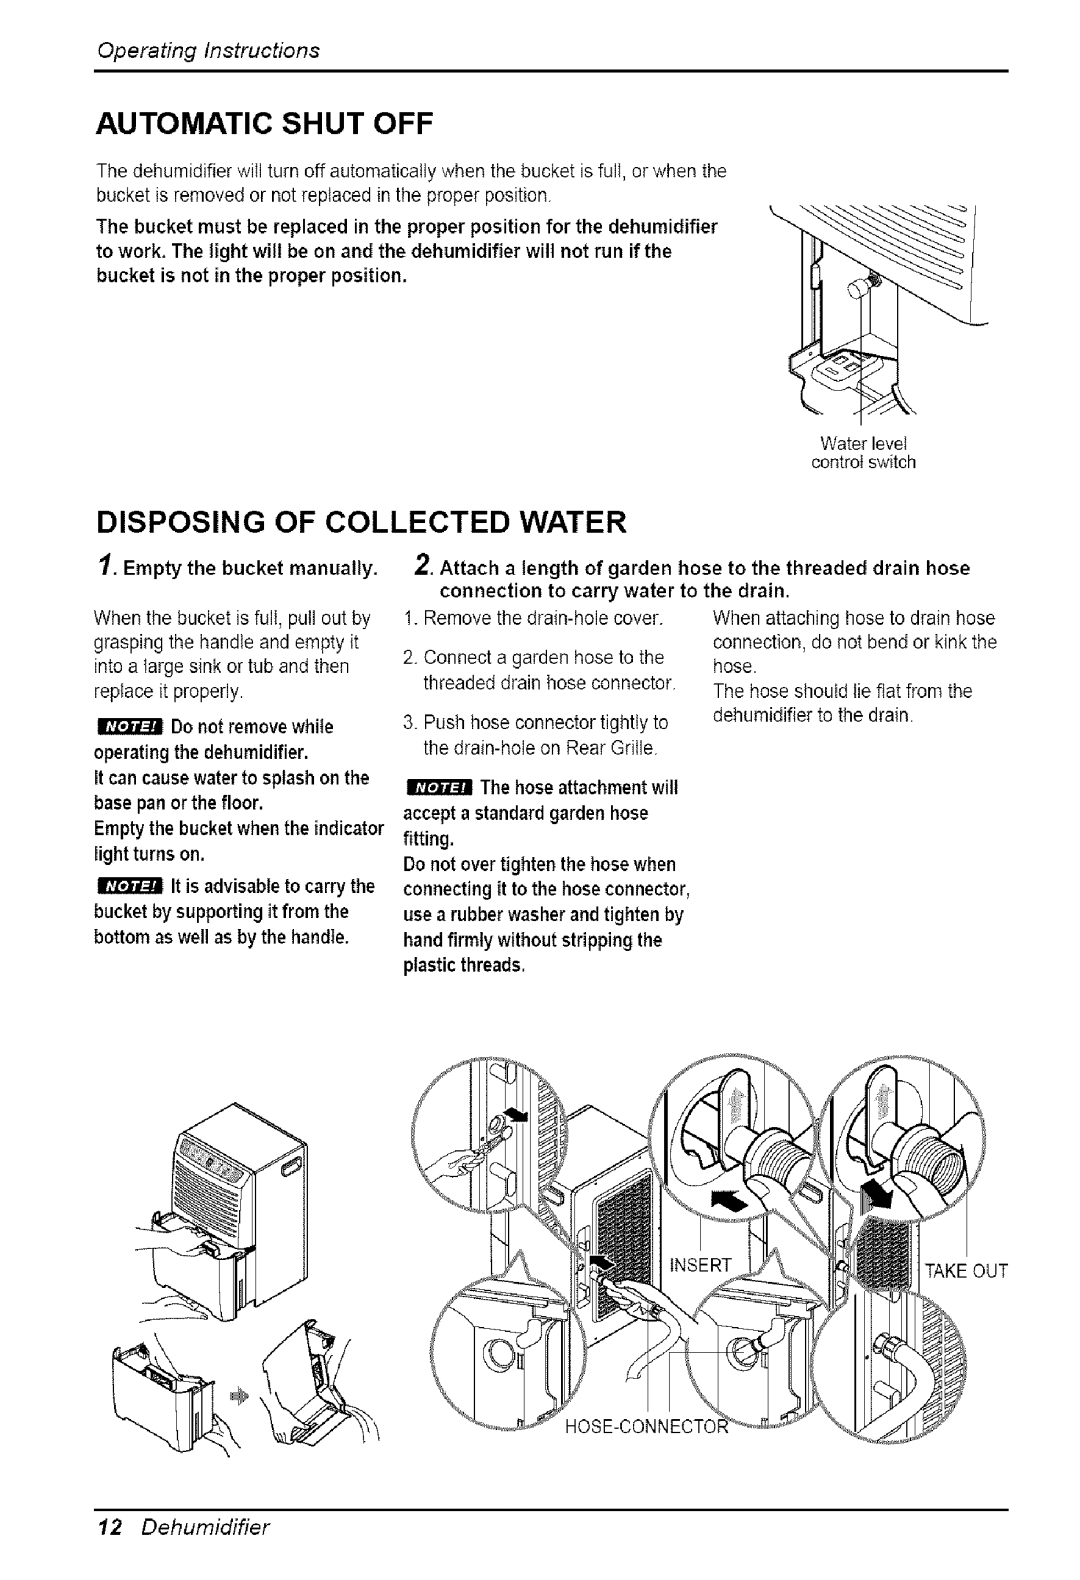 Friedrich D65C, D30C, D40C, D50C Automatic Shut Off, Disposing Of Collected Water, Operating Instructions, 12Dehumidifier 